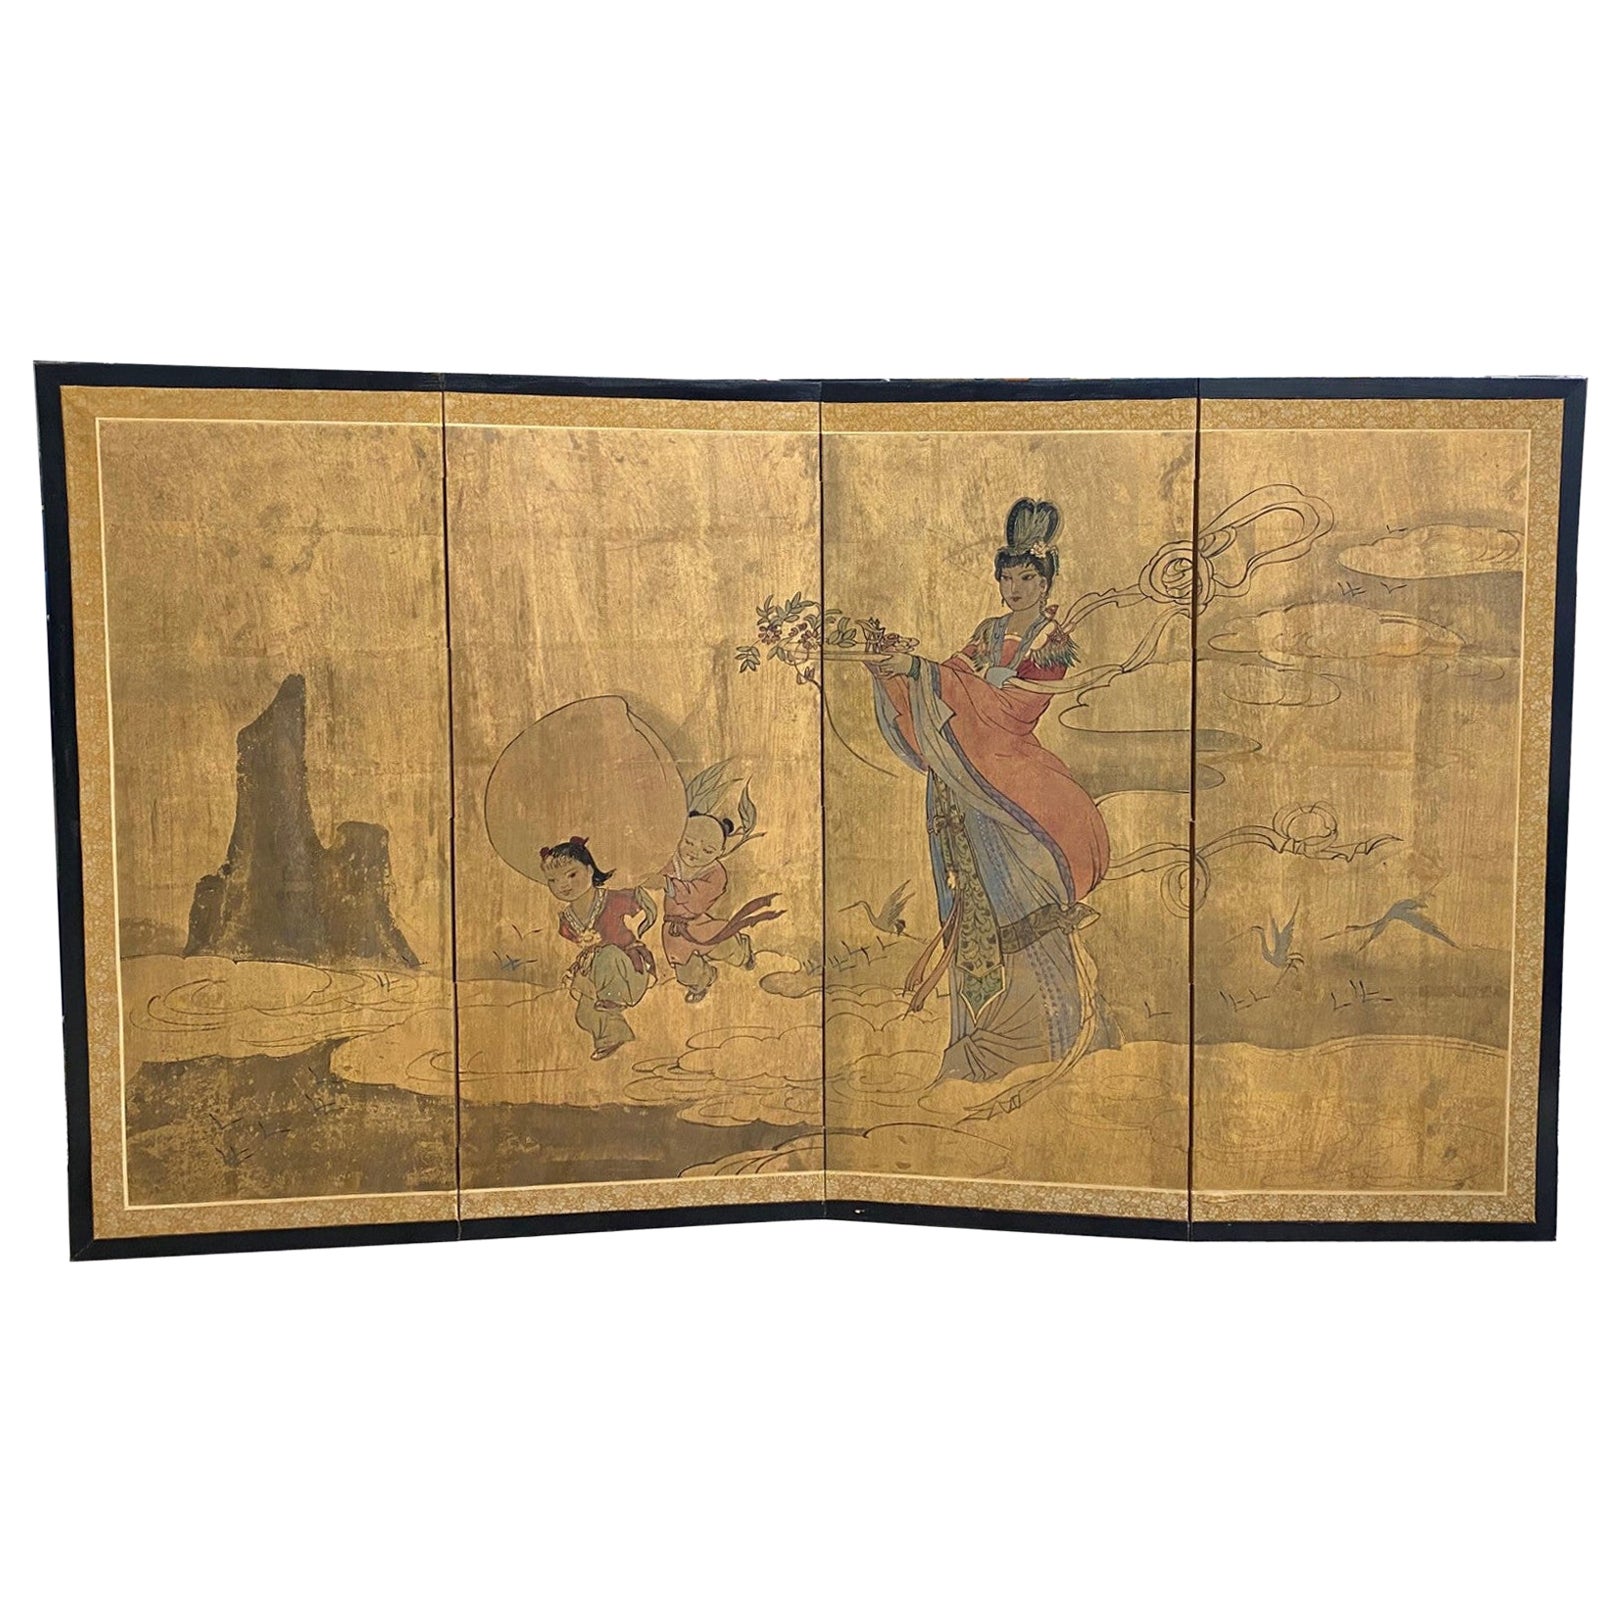 Japanese Chinese Asian Four-Panel Byobu Folding Screen Landscape with Children